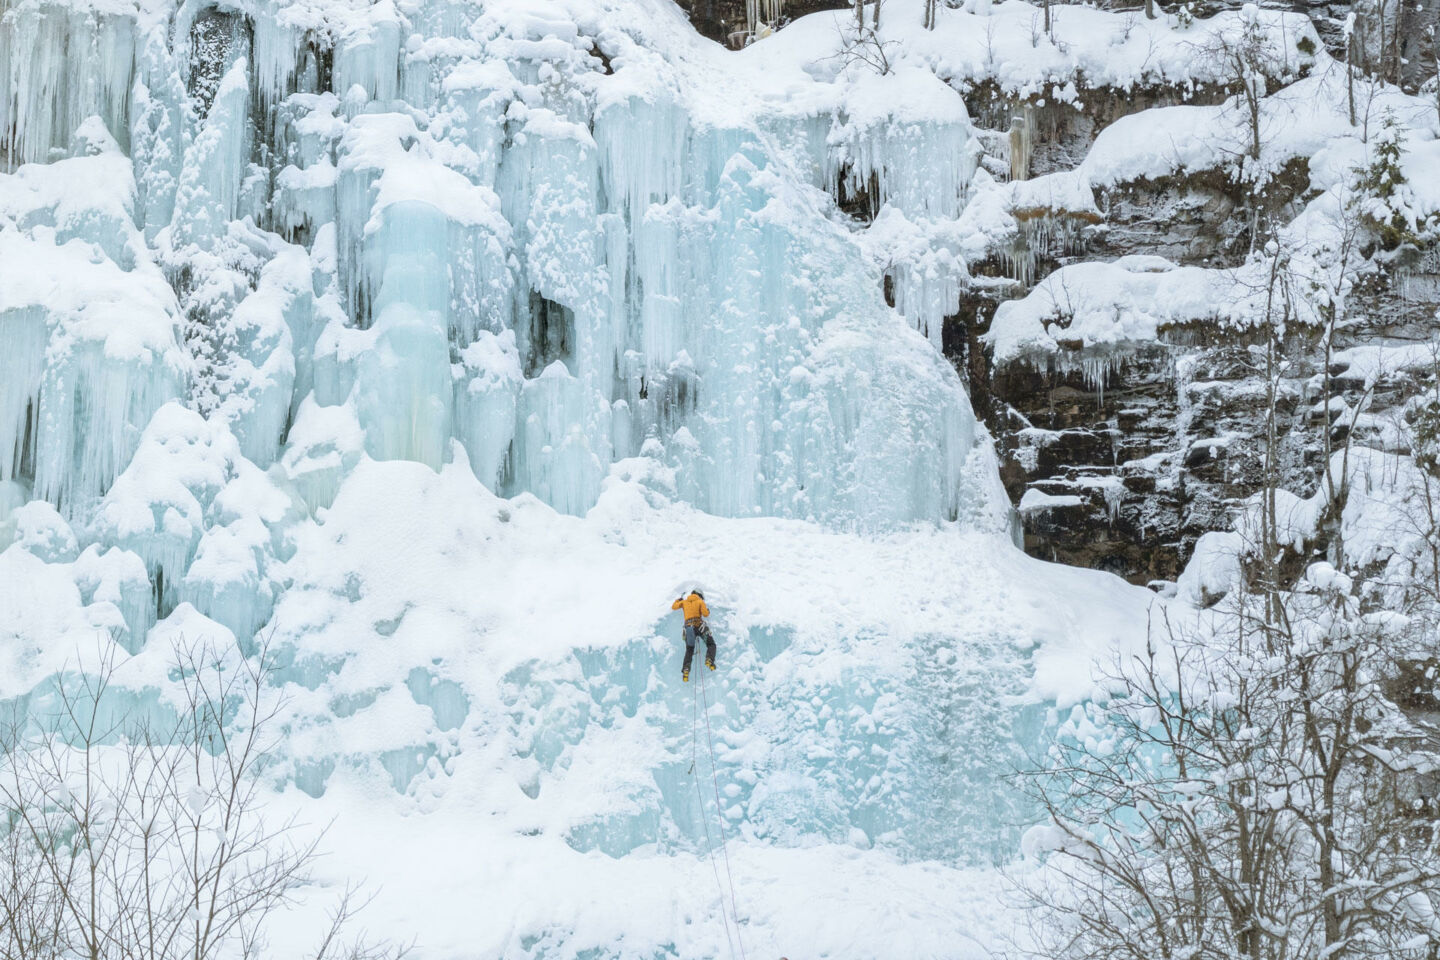 Climbing the frozen waterfall at the Korouoma Canyon in Posio, a Finnish Lapland filming location